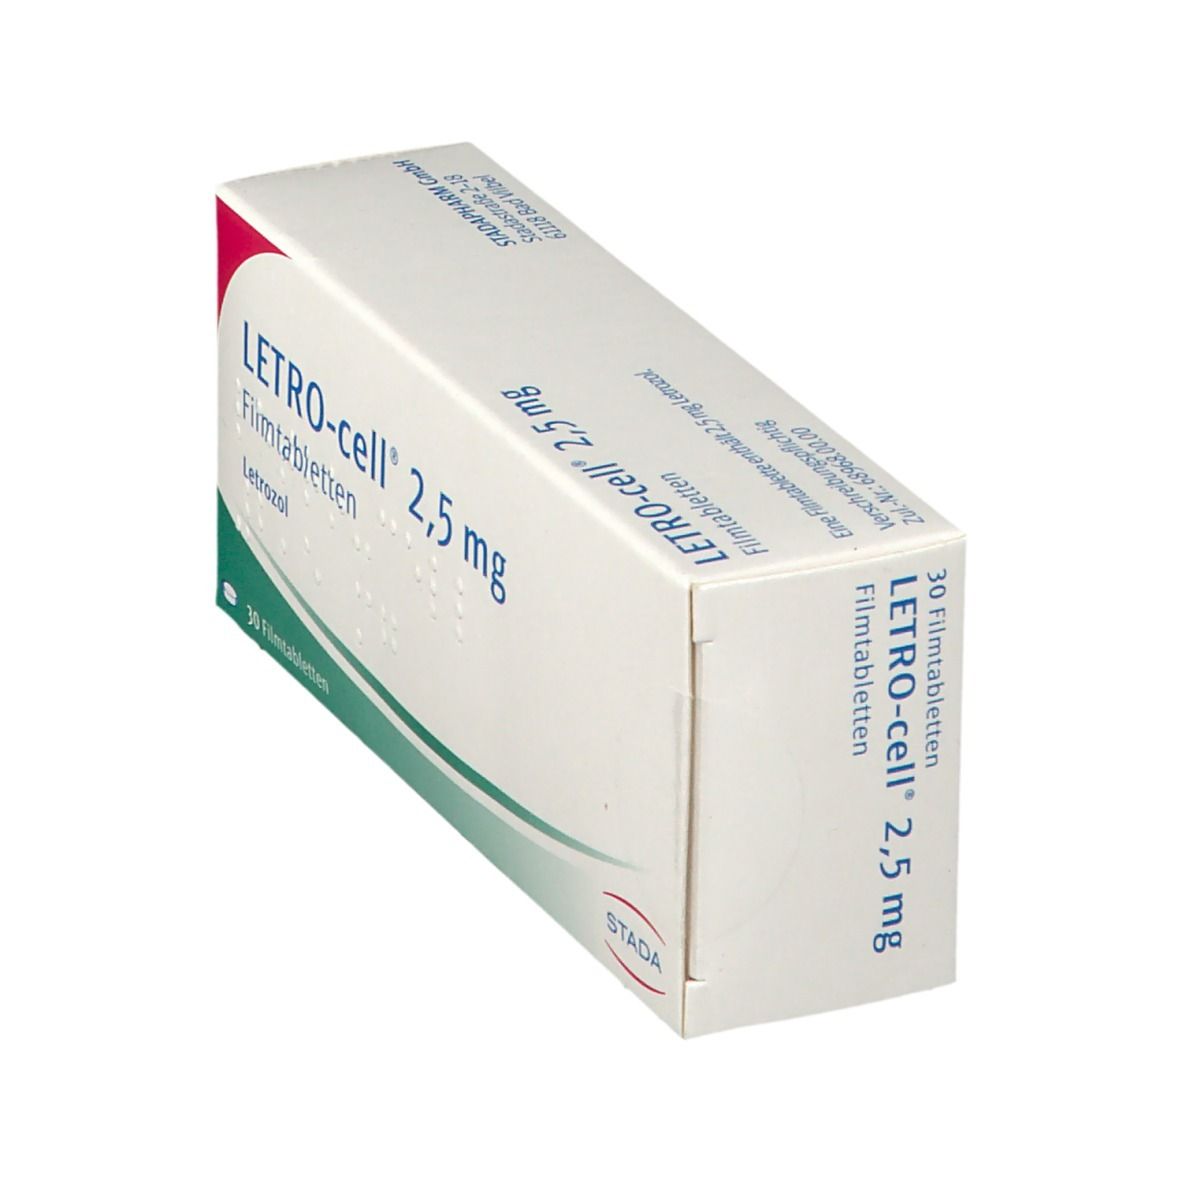 LETRO-cell 2,5 mg